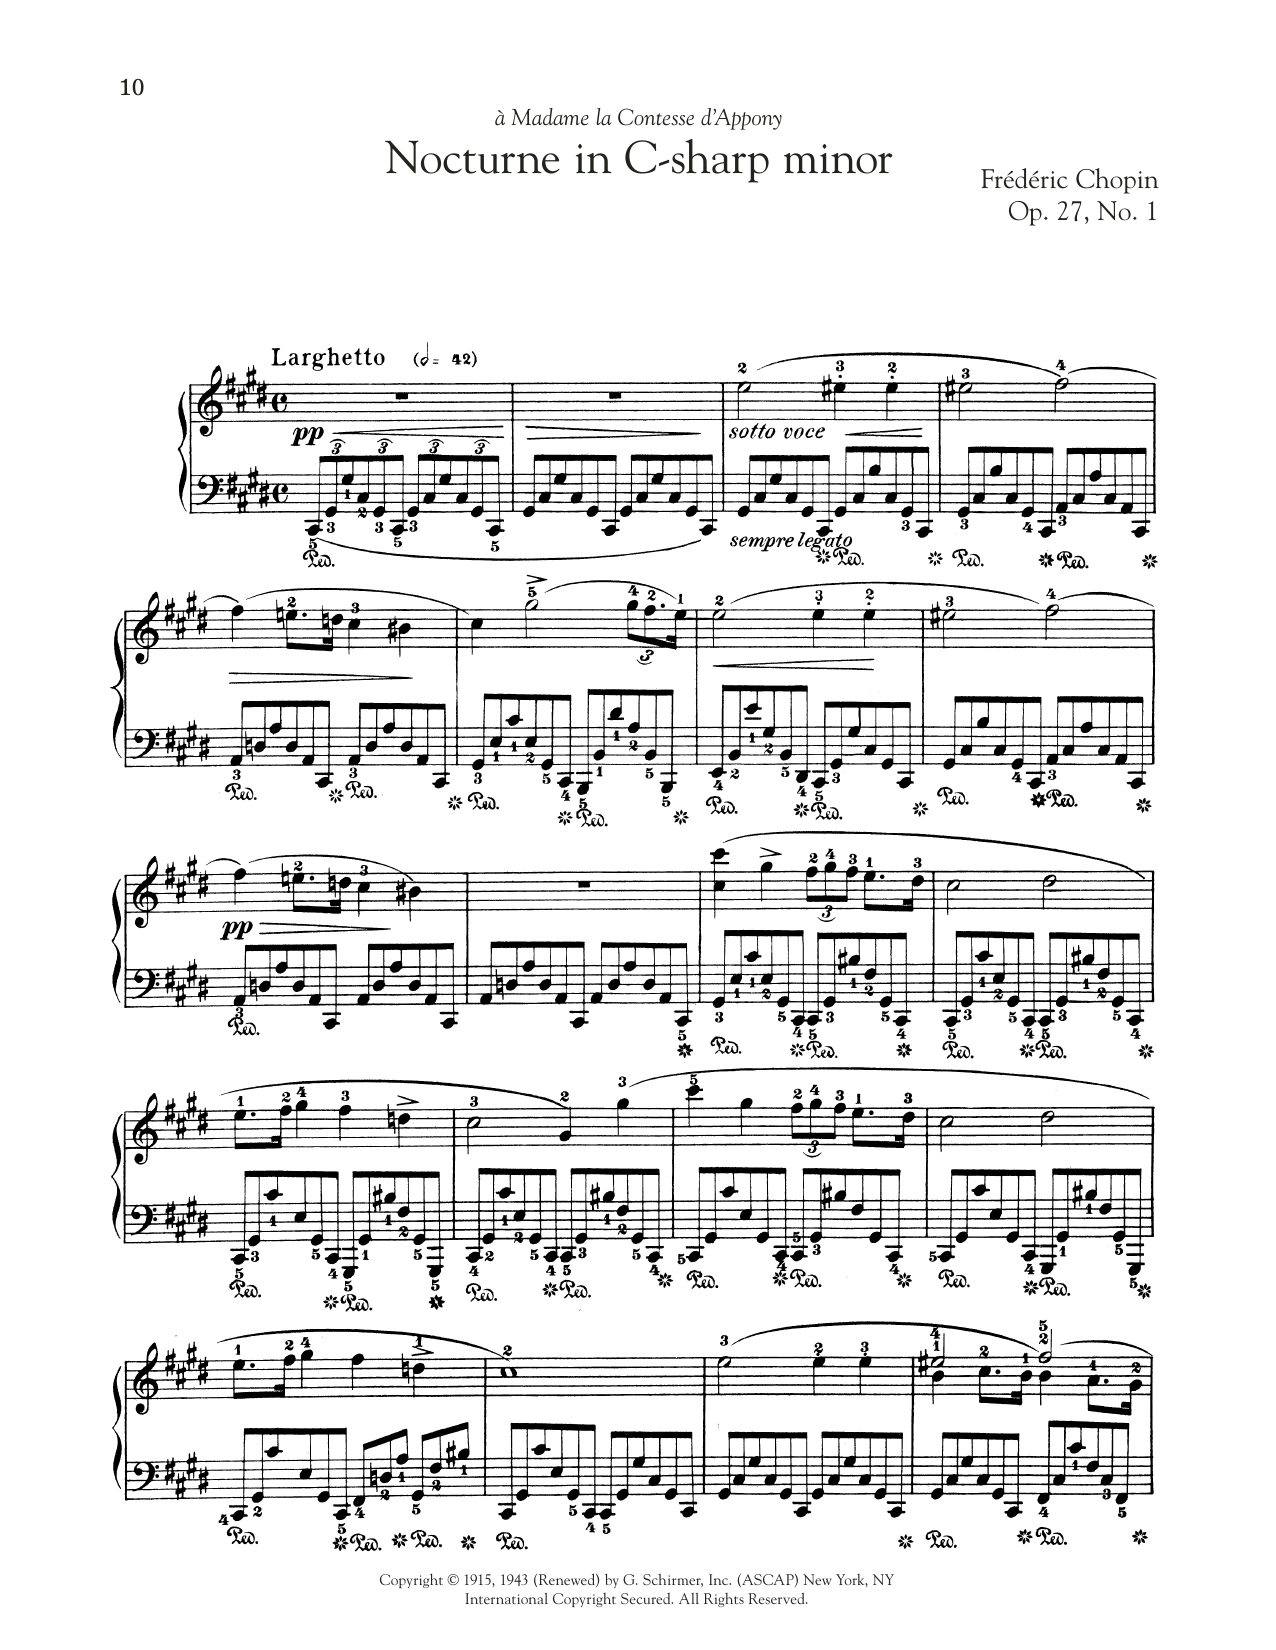 Frederic Chopin Nocturne, Op. 27, No. 1 sheet music preview music notes and score for Piano Solo including 5 page(s)